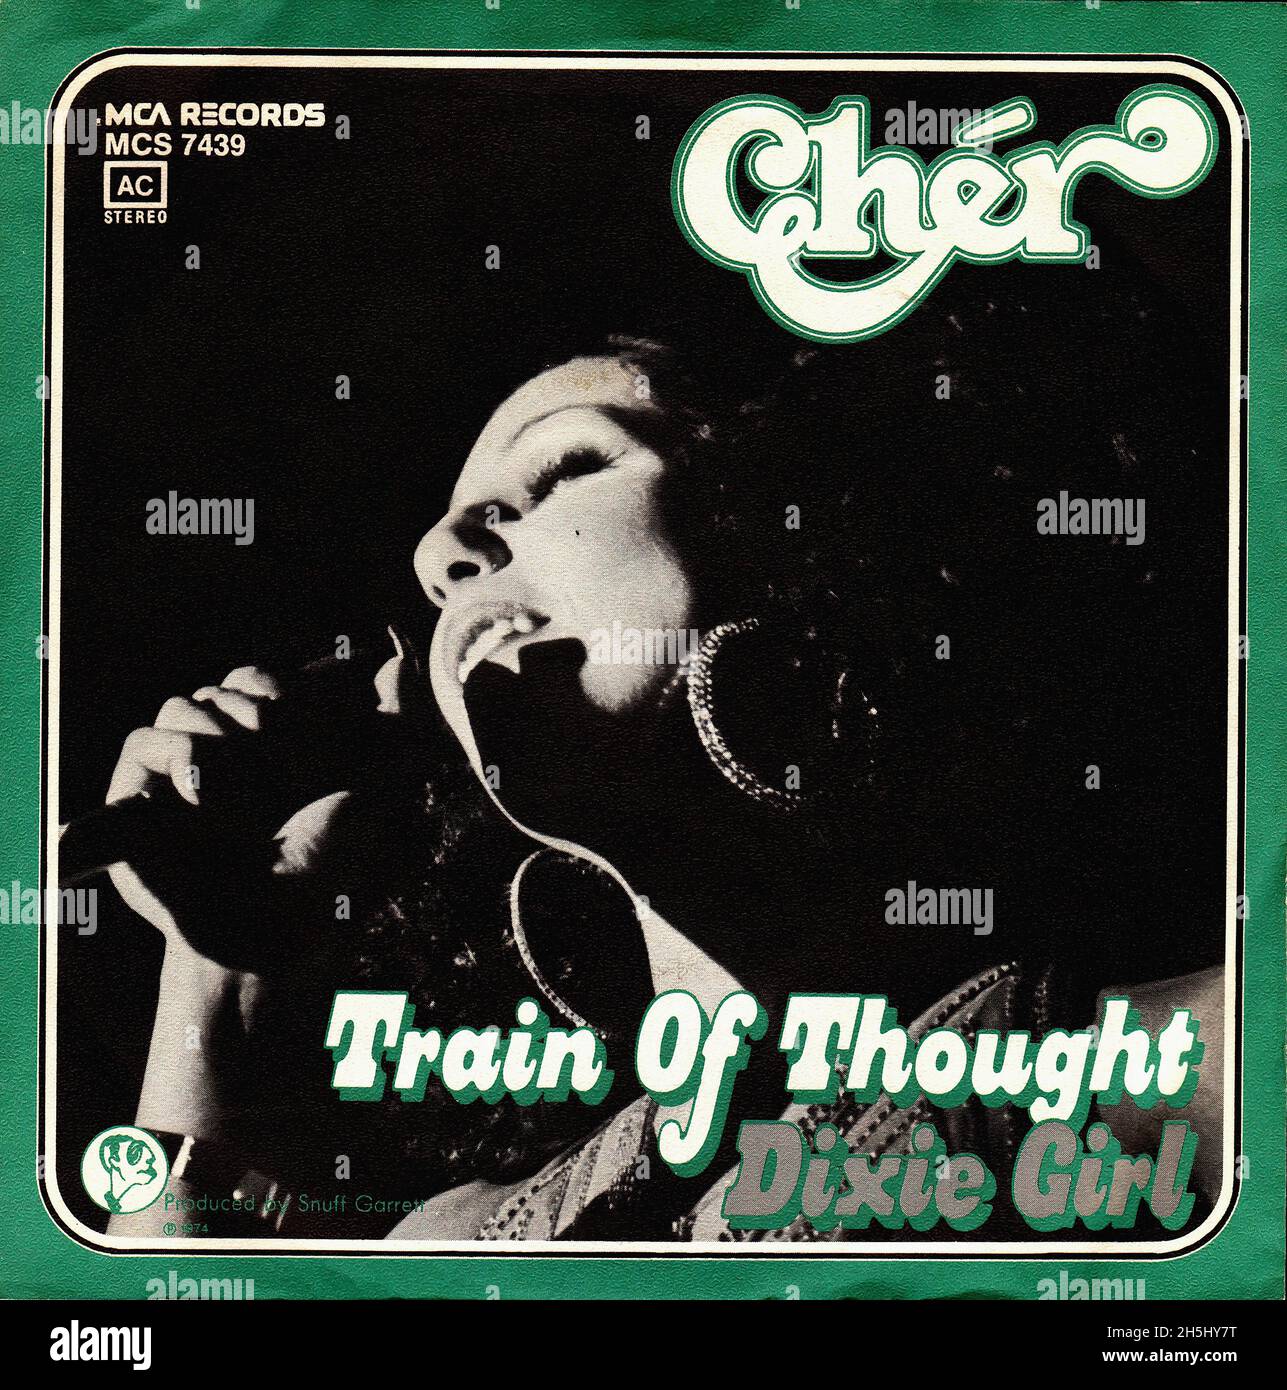 Vintage single record cover - Cher - Train Of Thought - D - 1974 Stock Photo